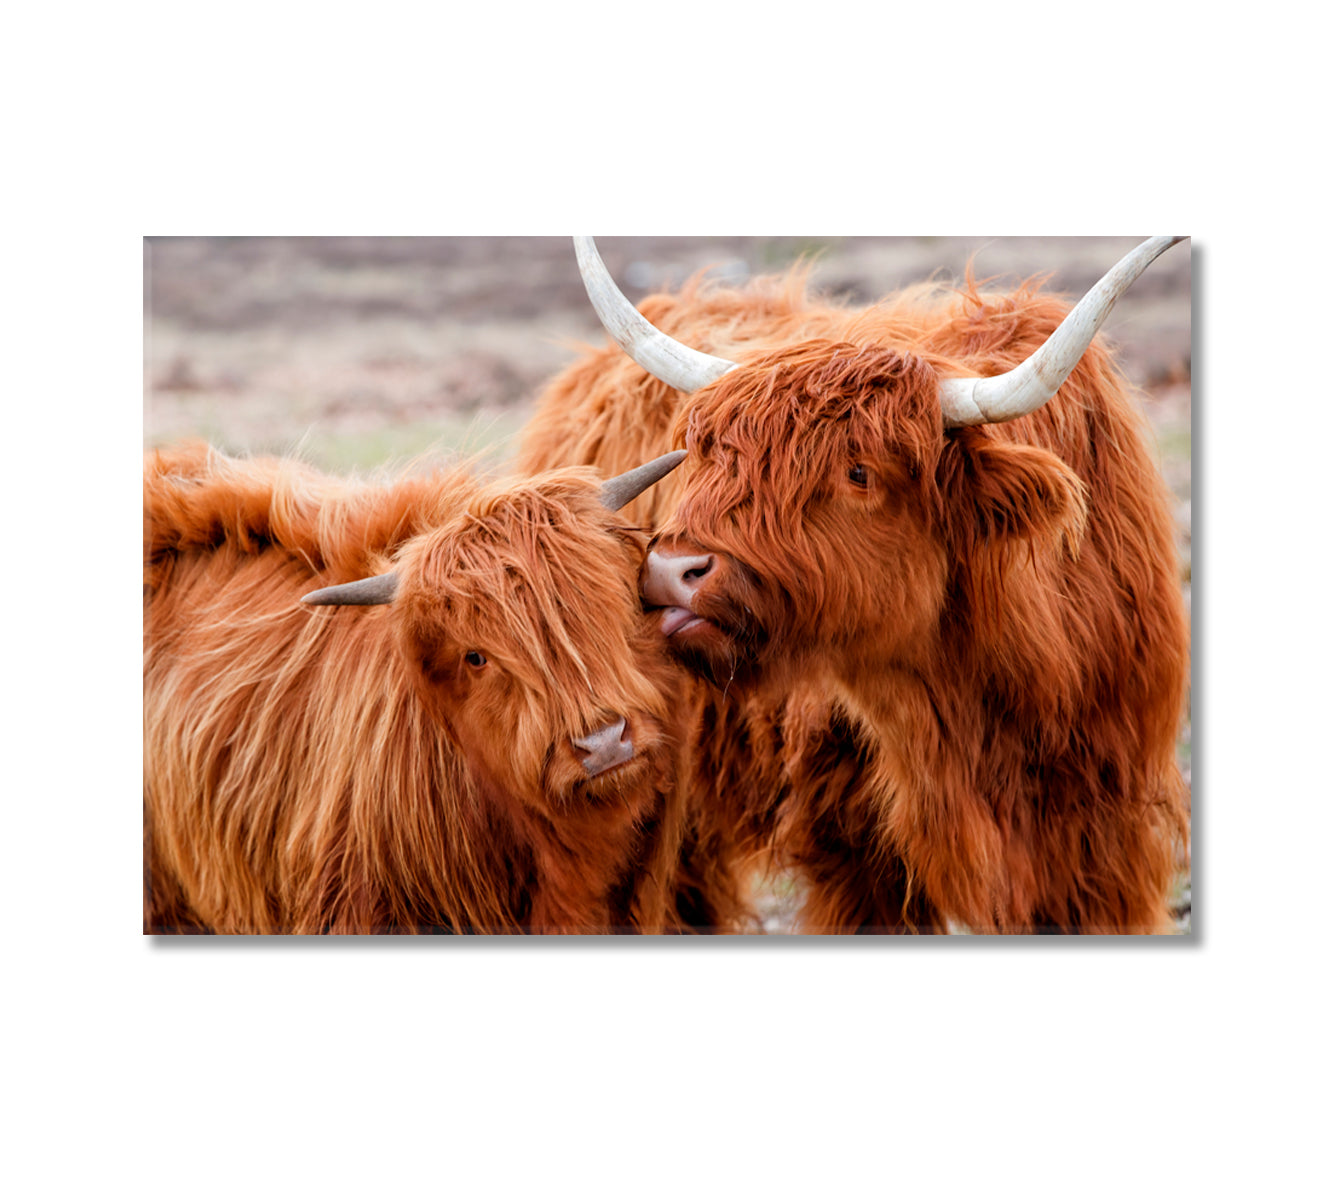 Highland Cow Family Art For Home-Canvas Print-CetArt-1 Panel-24x16 inches-CetArt